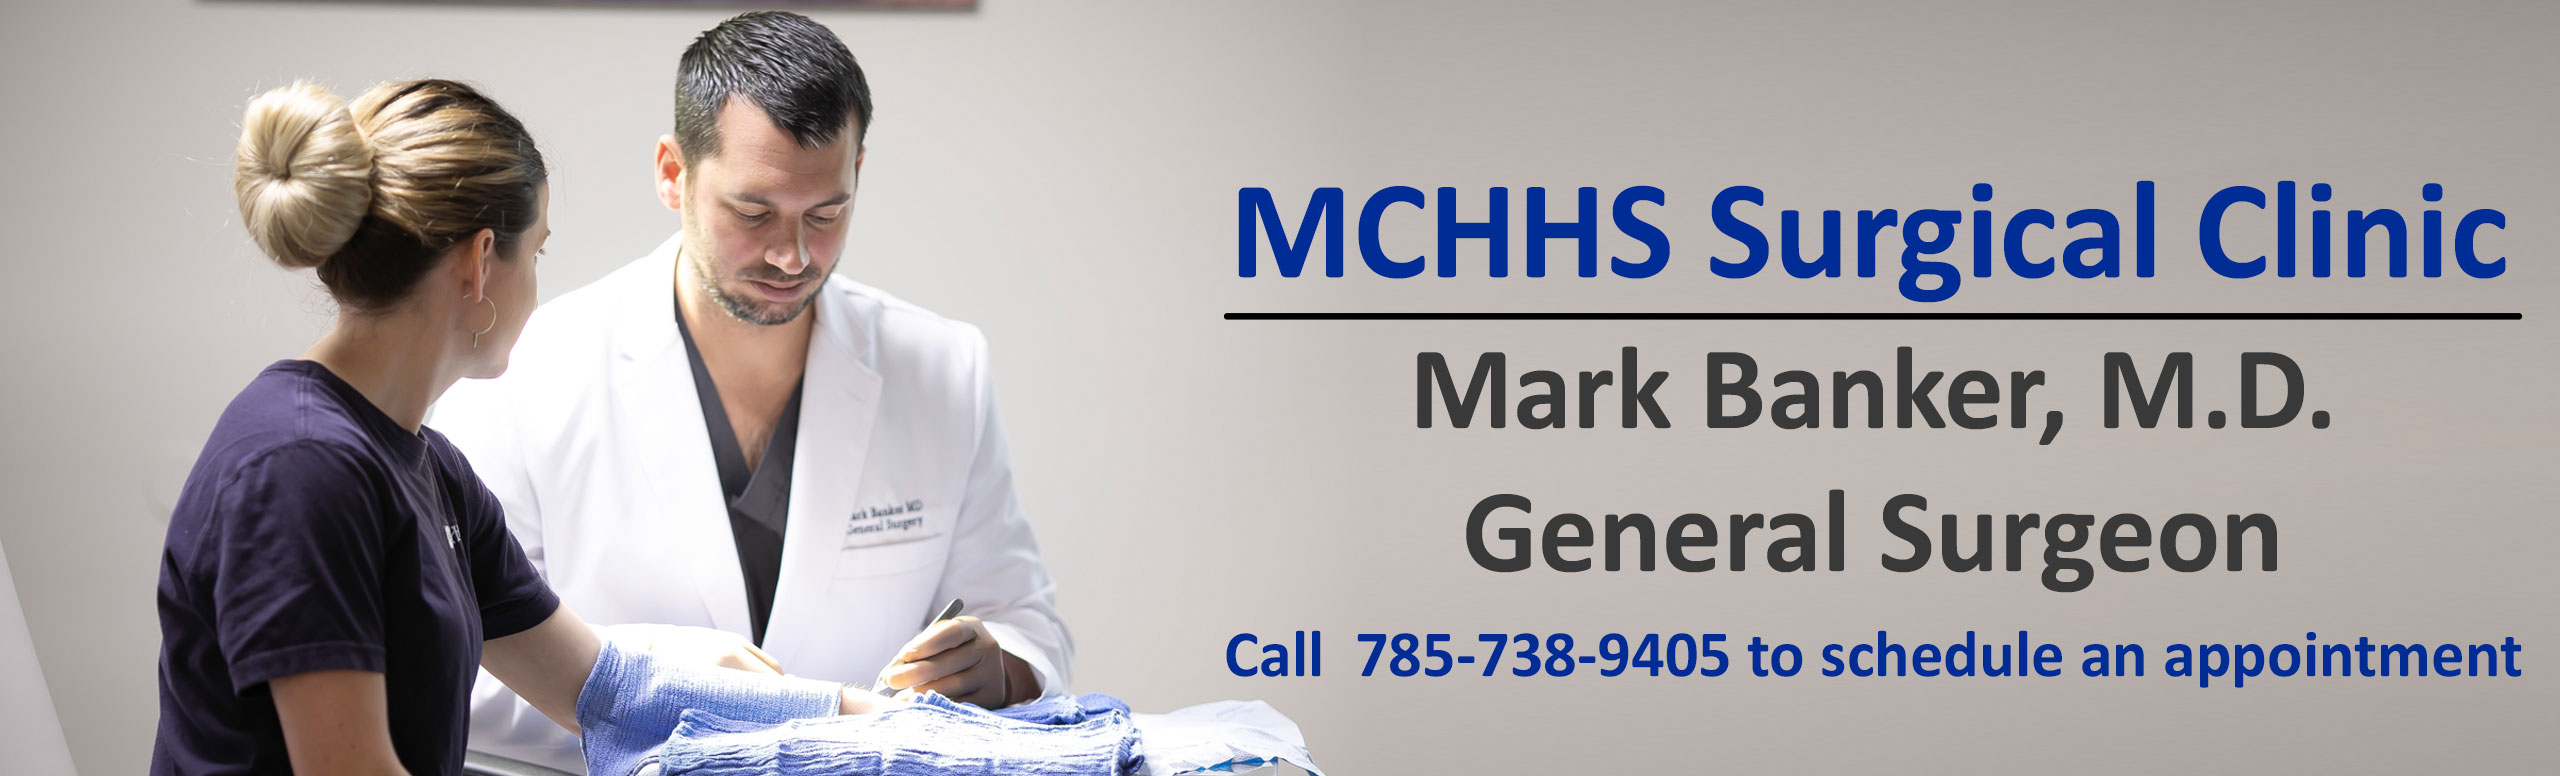 Picture of a male Physician performing a surgery on a woman'a arm. Banner says:
MCHHS Surgical Clinic
Mark Banker, M.D.
General Surgeon
Call 785-738-9405 to schedule an appointment